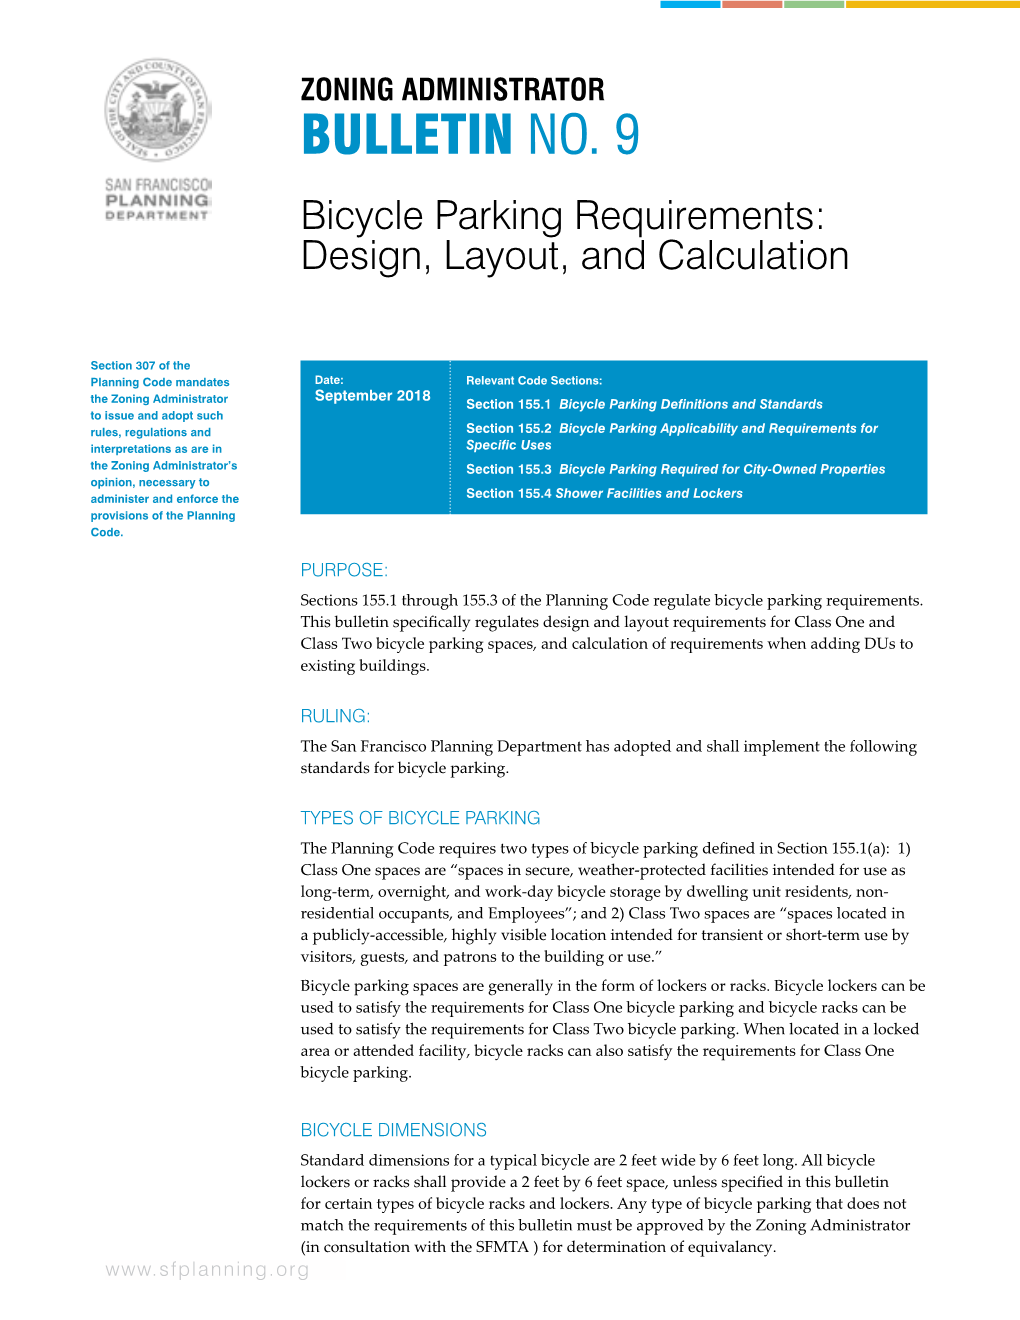 ZONING ADMINISTRATOR BULLETIN NO. 9 Bicycle Parking Requirements: Design, Layout, and Calculation